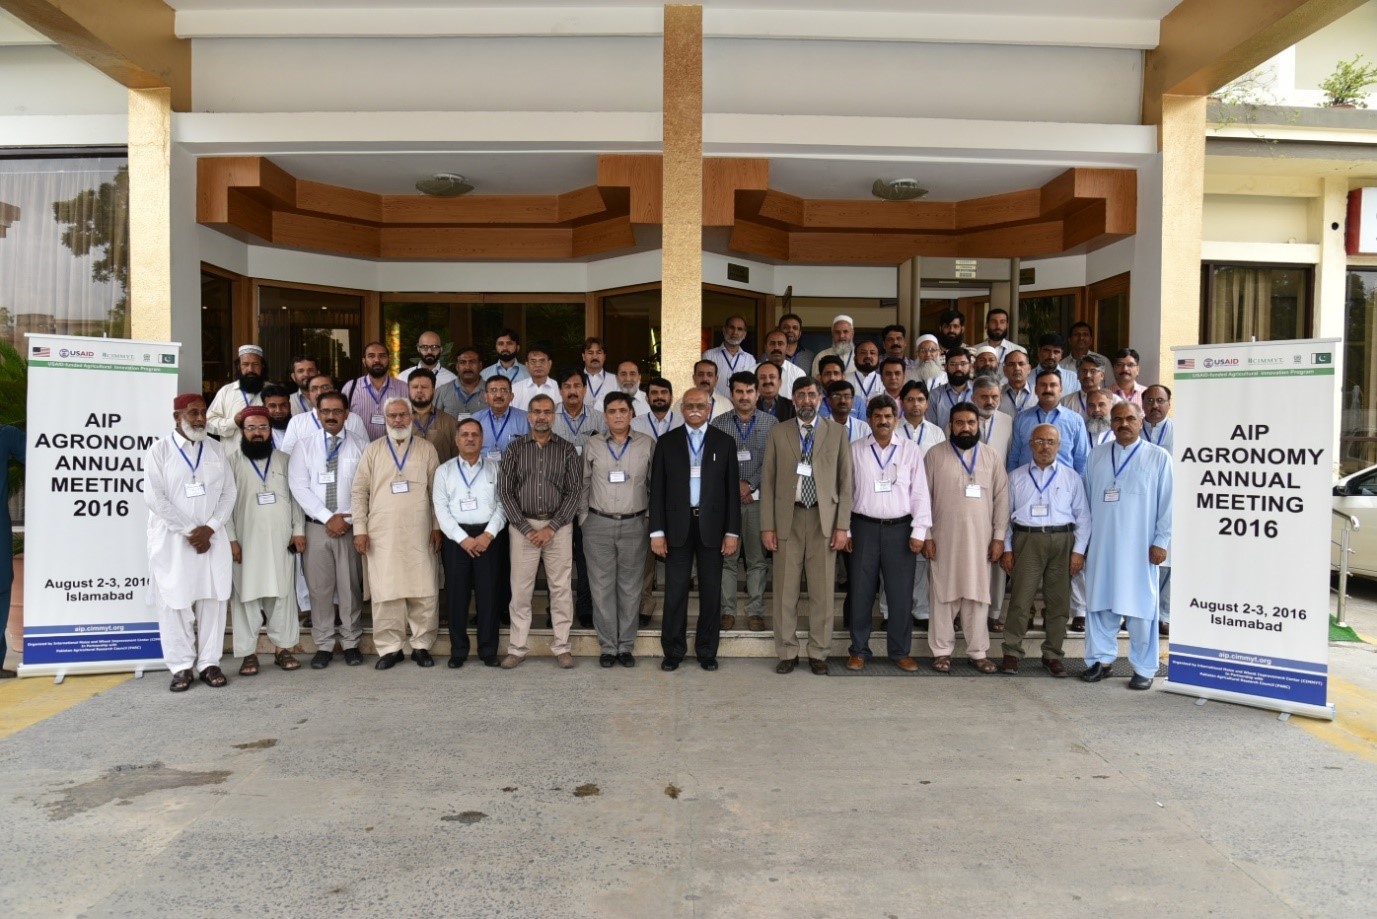 Participants in AIP Agronomy’s 2016 meeting at held at the Islamabad Hotel, Islamabad, Pakistan. Photo: Mushtaq